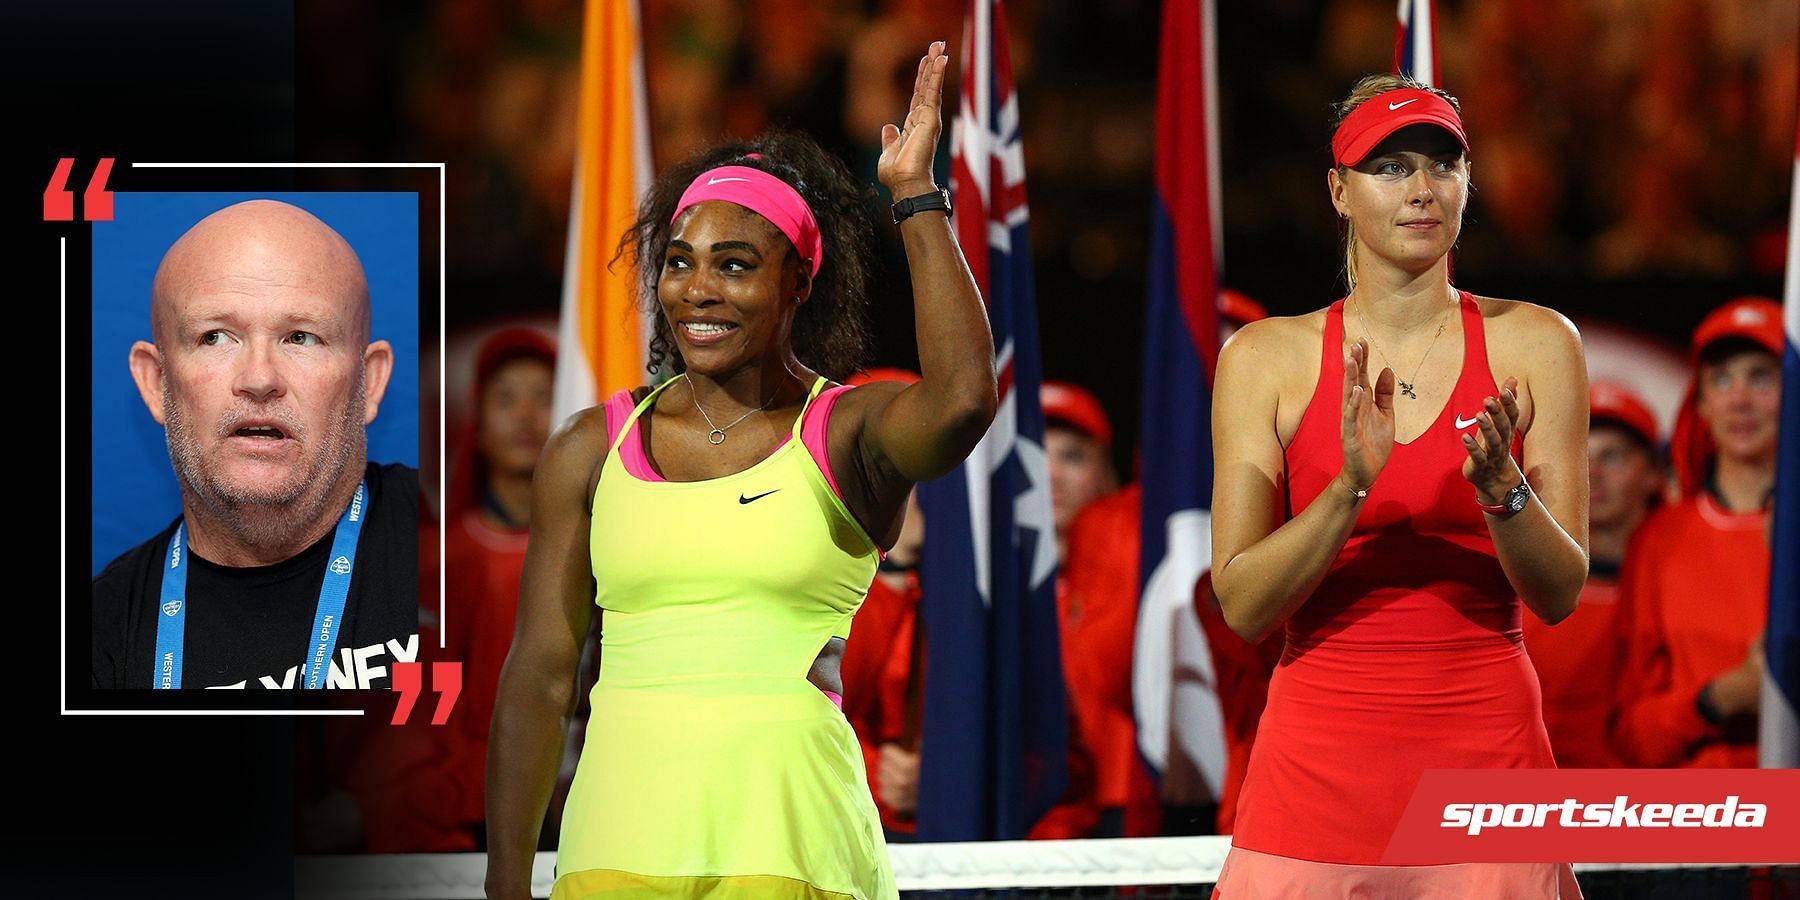 Serena Williams and Maria Sharapova faced each other 22 times.